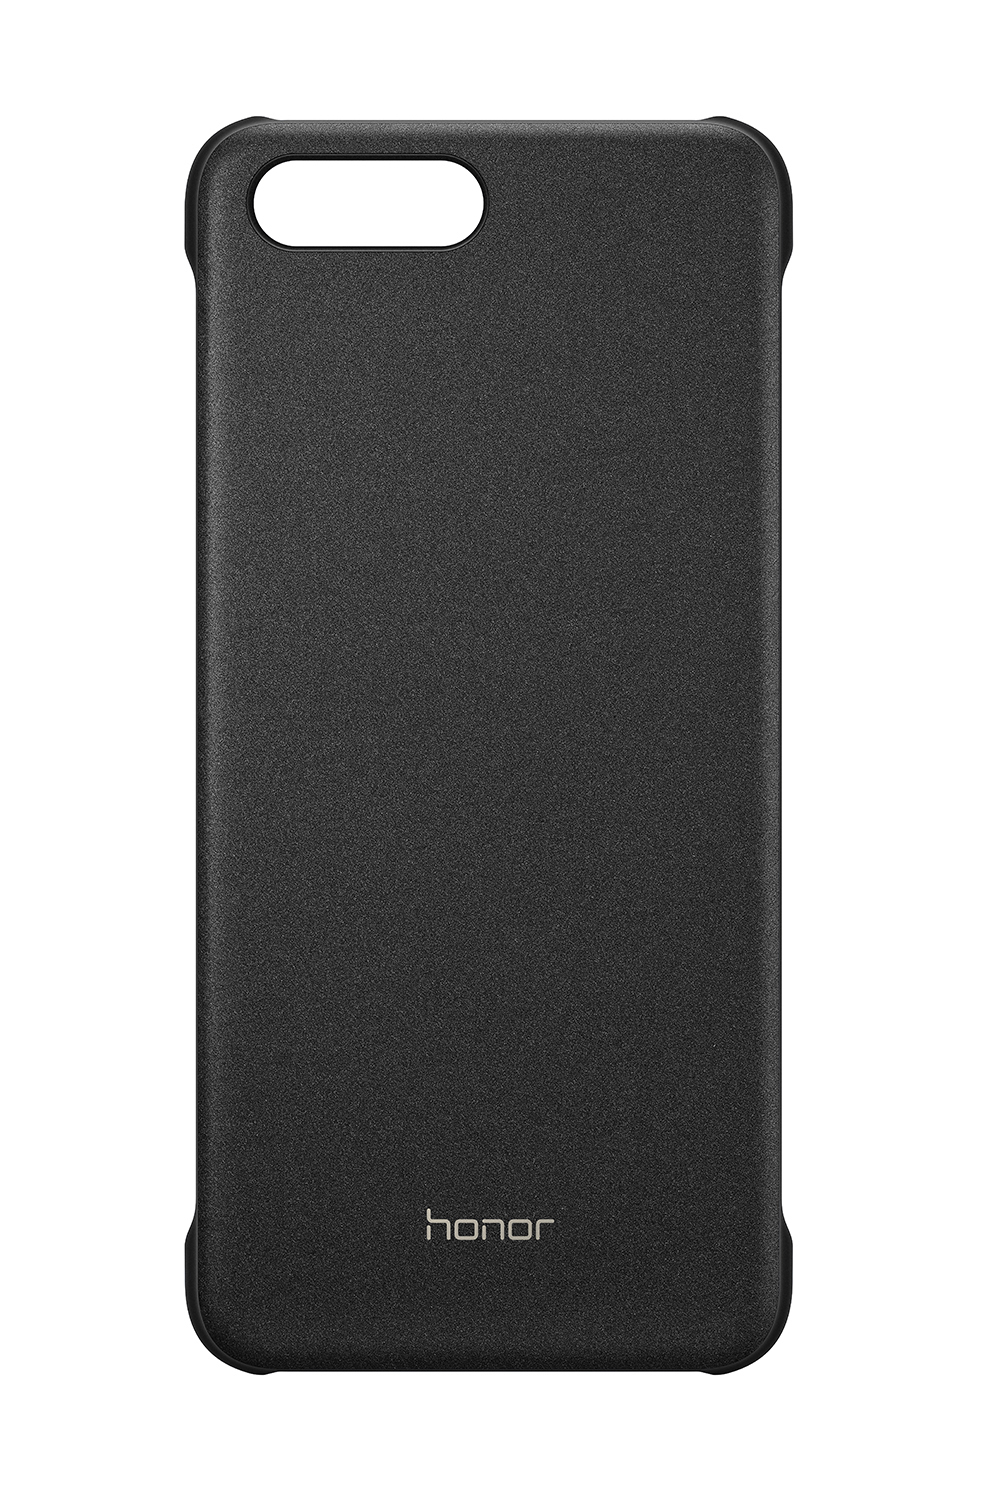 HONOR PU Honor, Schwarz View Magnet, Backcover, 10